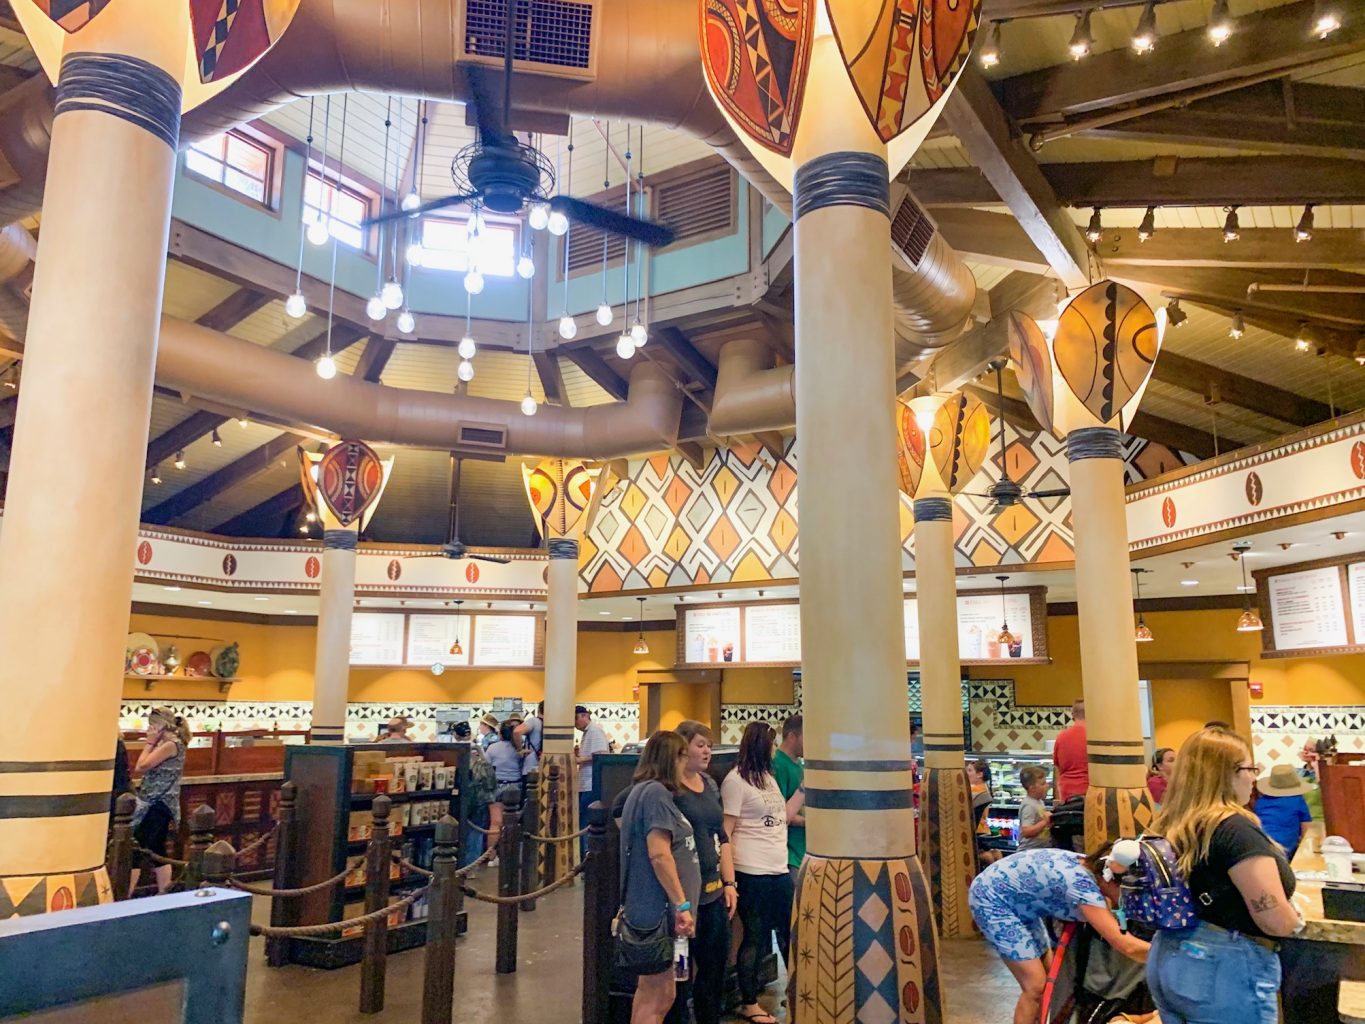 This African art-themed indoor ordering area gets overcrowded with towering poles and lots of people, not to mention expensive coffee! Creature comforts is NOT one of the best Animal Kingdom restaurants to spend money at!  